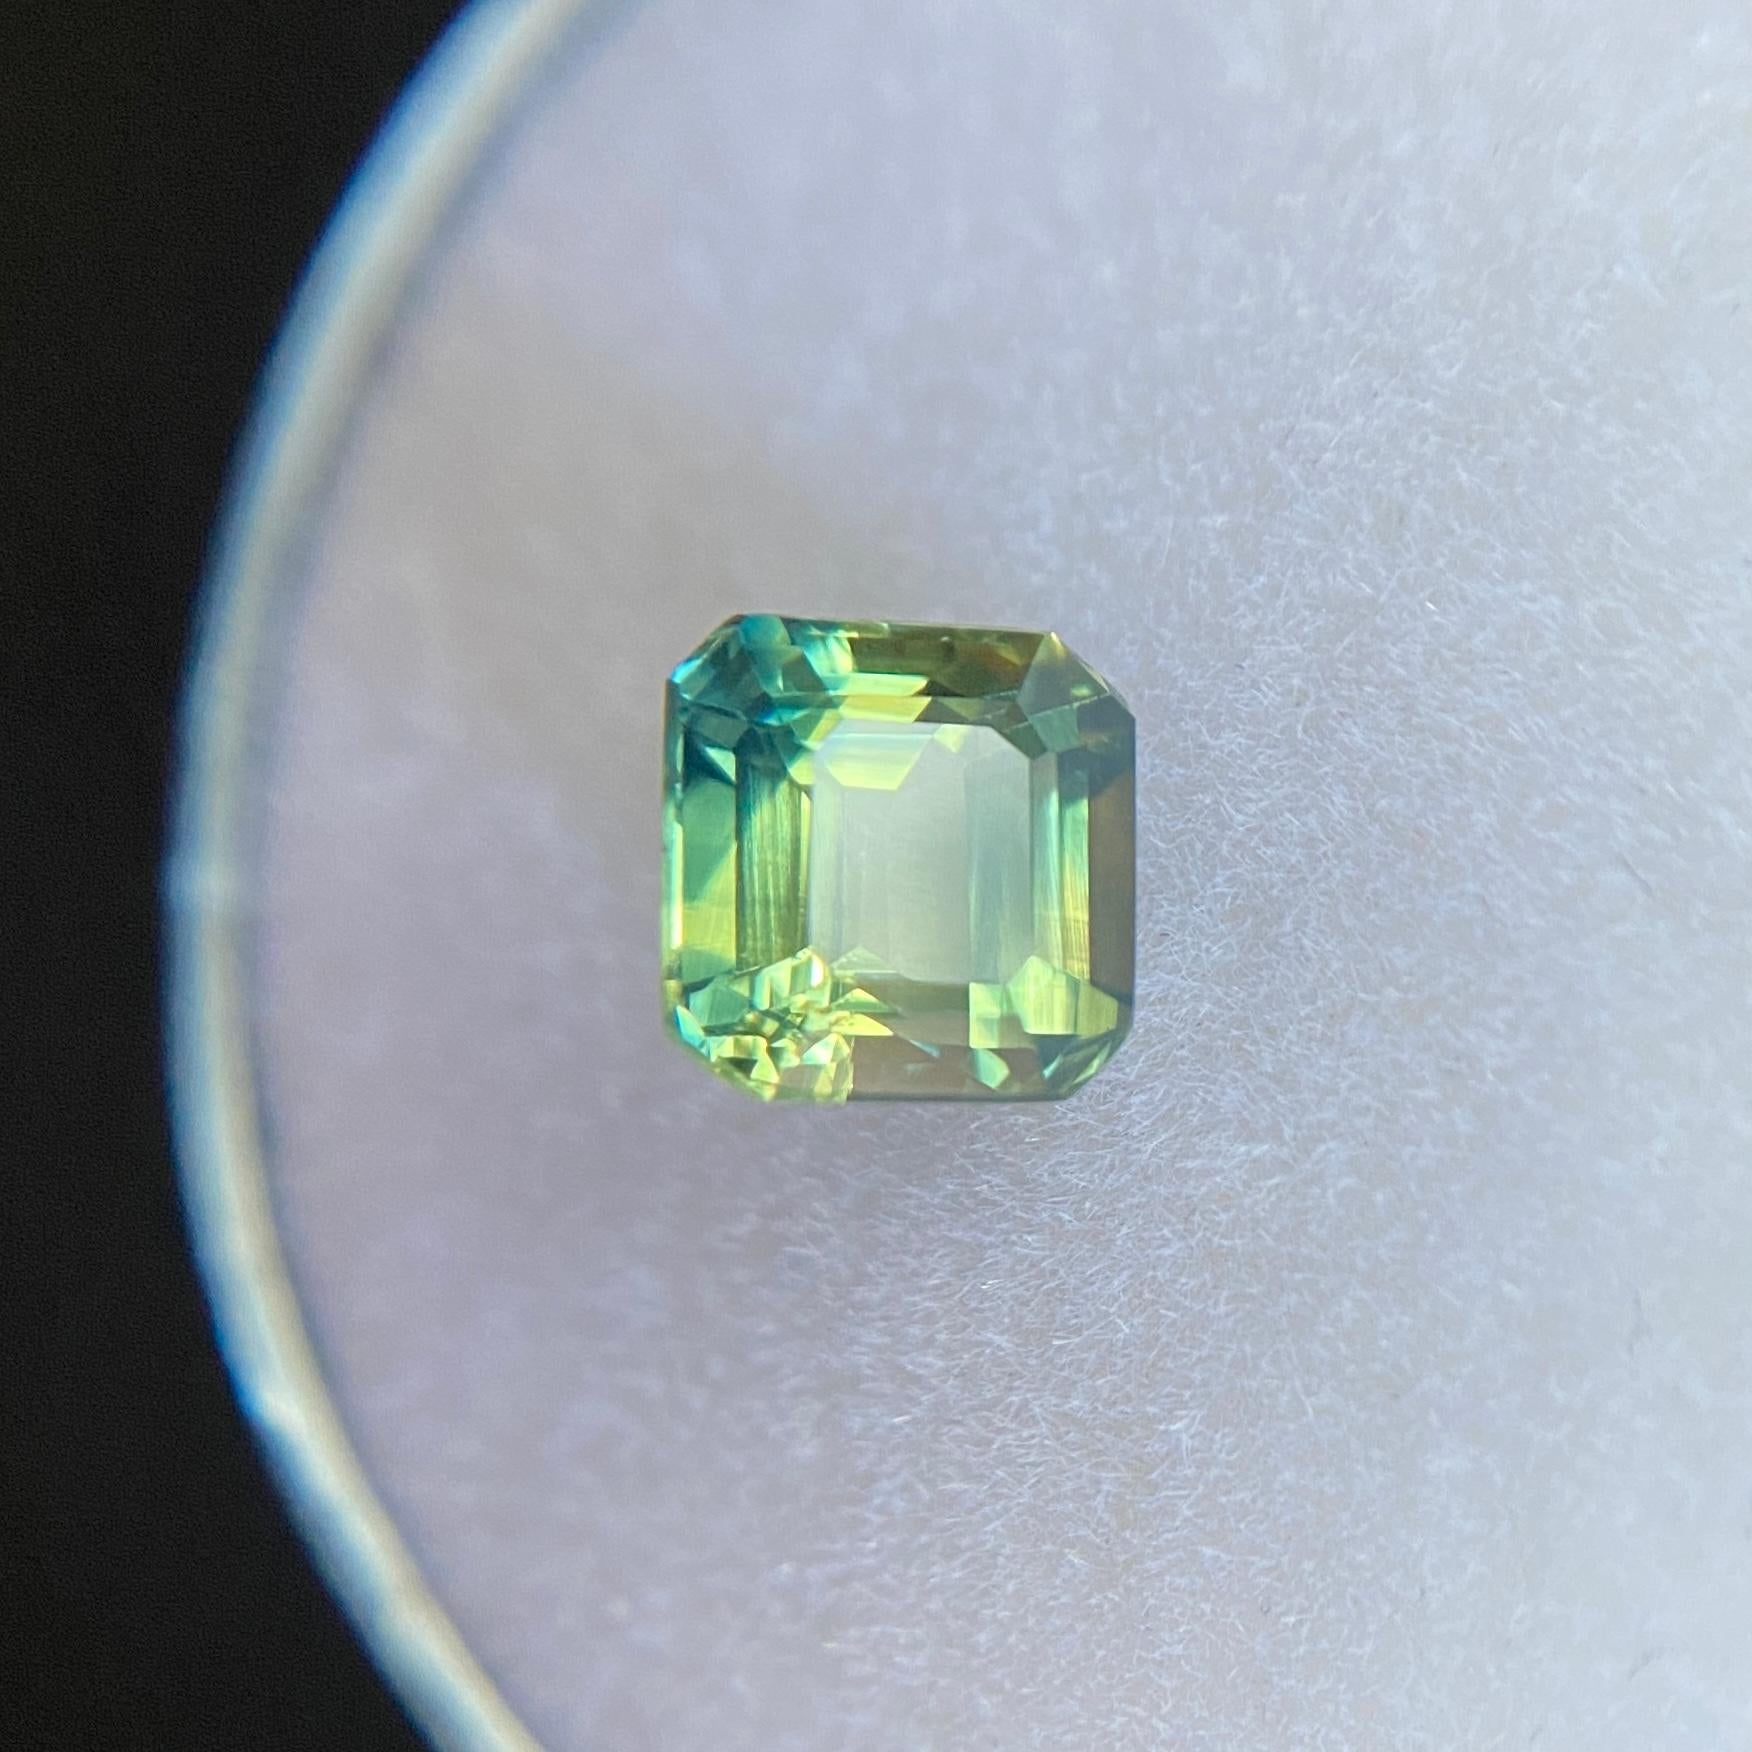 Rare Untreated Australian Parti Colour Sapphire Gemstone.

1.31 Carat unheated sapphire with a rare parti colour effect. Showing blue and yellow colours with a unique colour split. Very rare and stunning to see.

Fully certified by GIA confirming